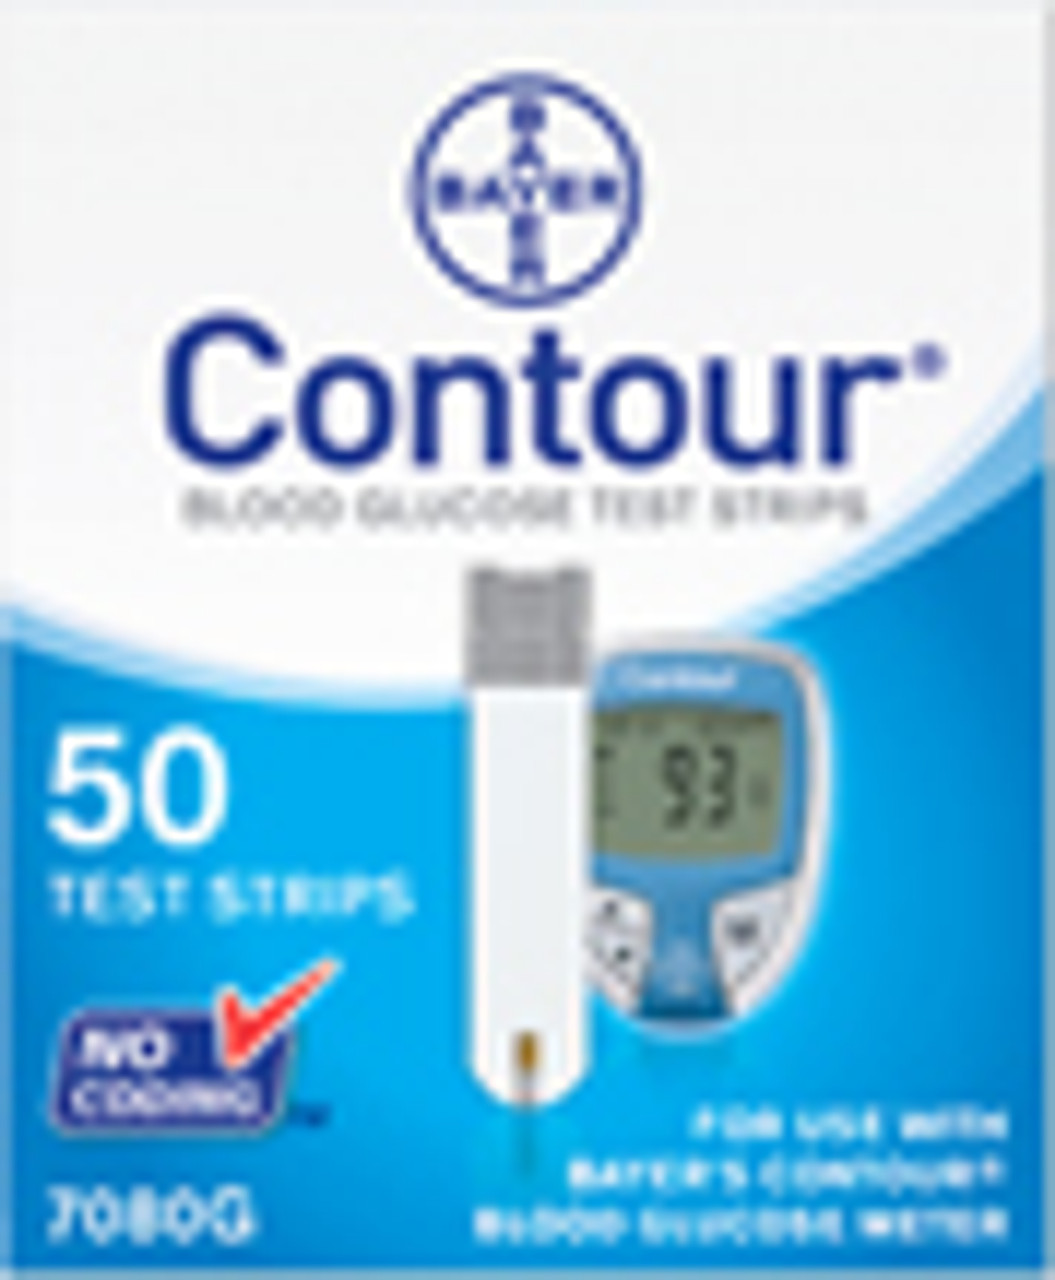 CONTOUR® NEXT Blood Glucose Test Strips, Medicare, Yellow, 50ct (A4253) -  DDP Medical Supply